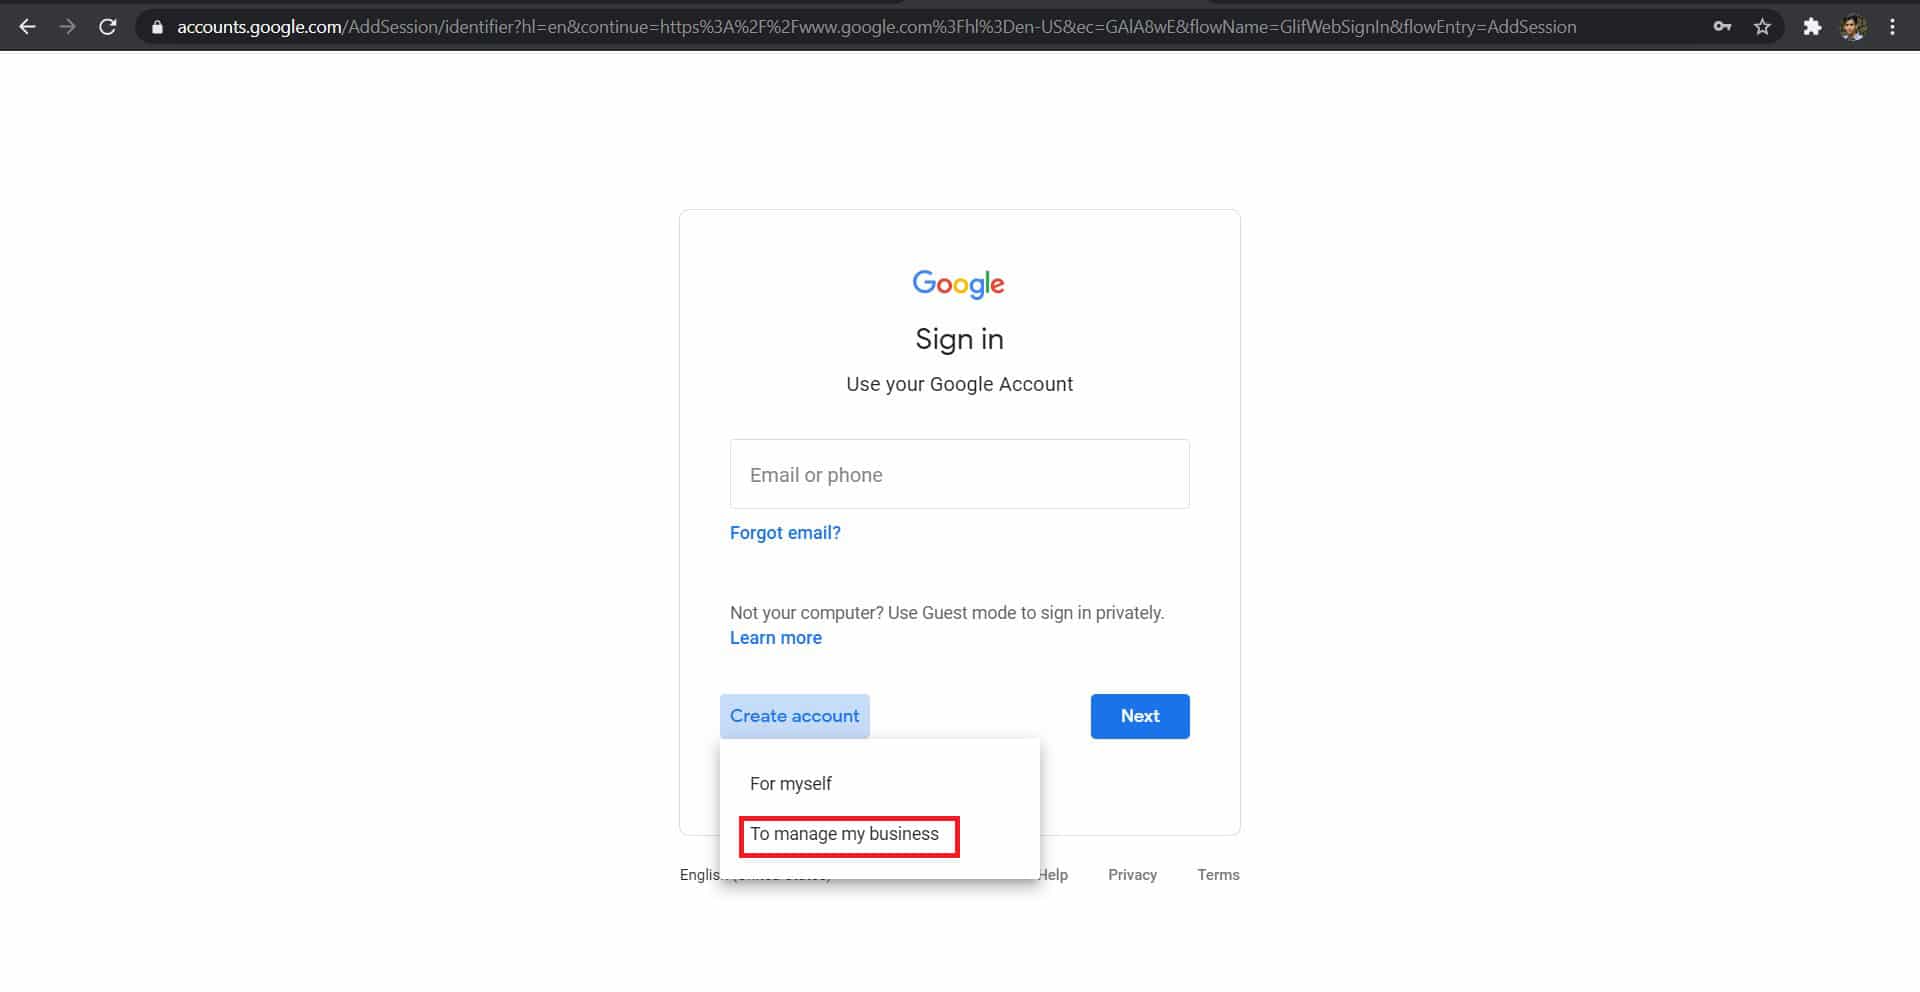 Click on ‘To manage my business to create a business Gmail account | How to create a Gmail Account without Phone Number Verification